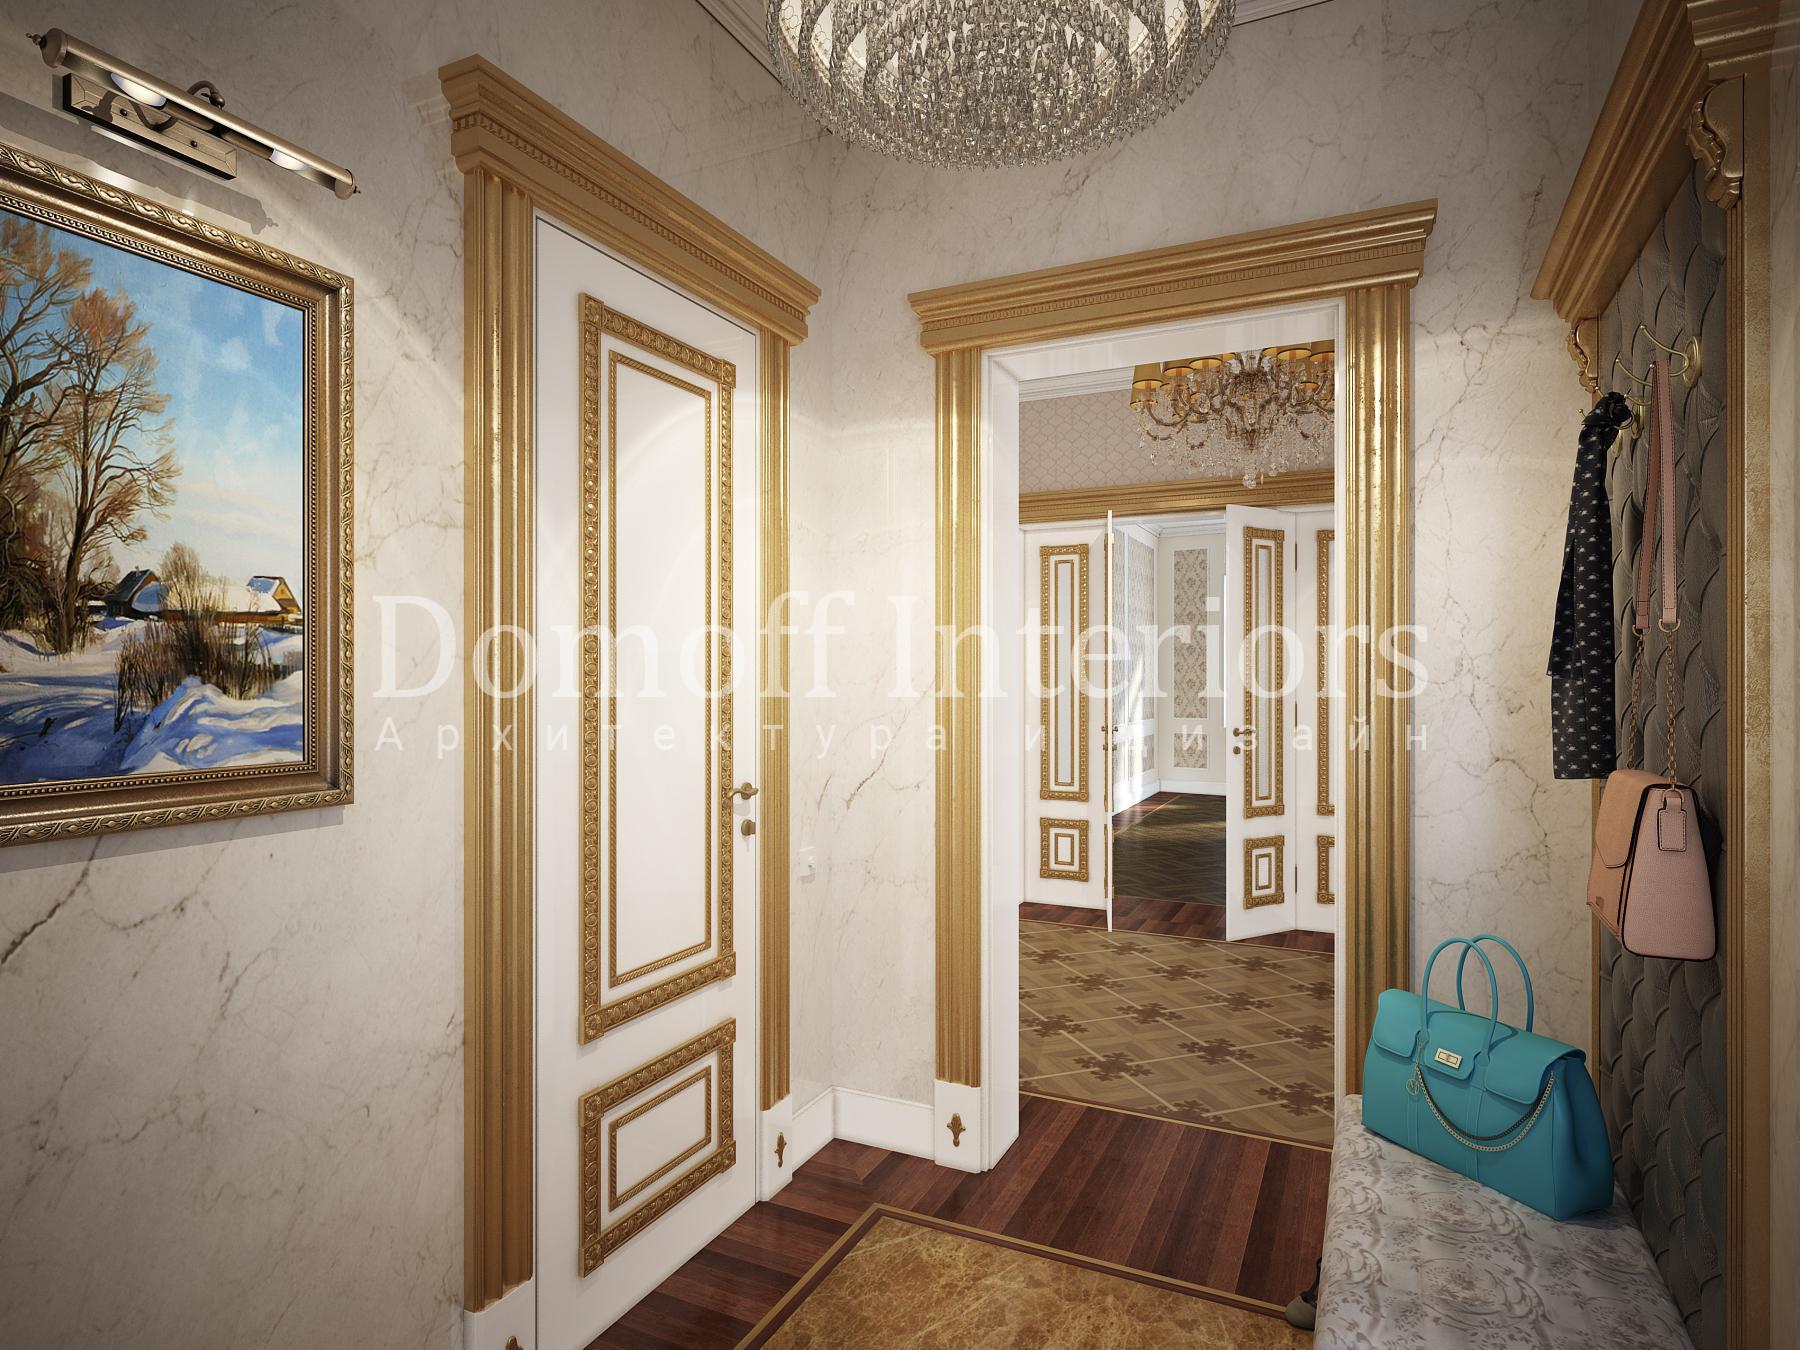 Entrance hall made in the style of Classics